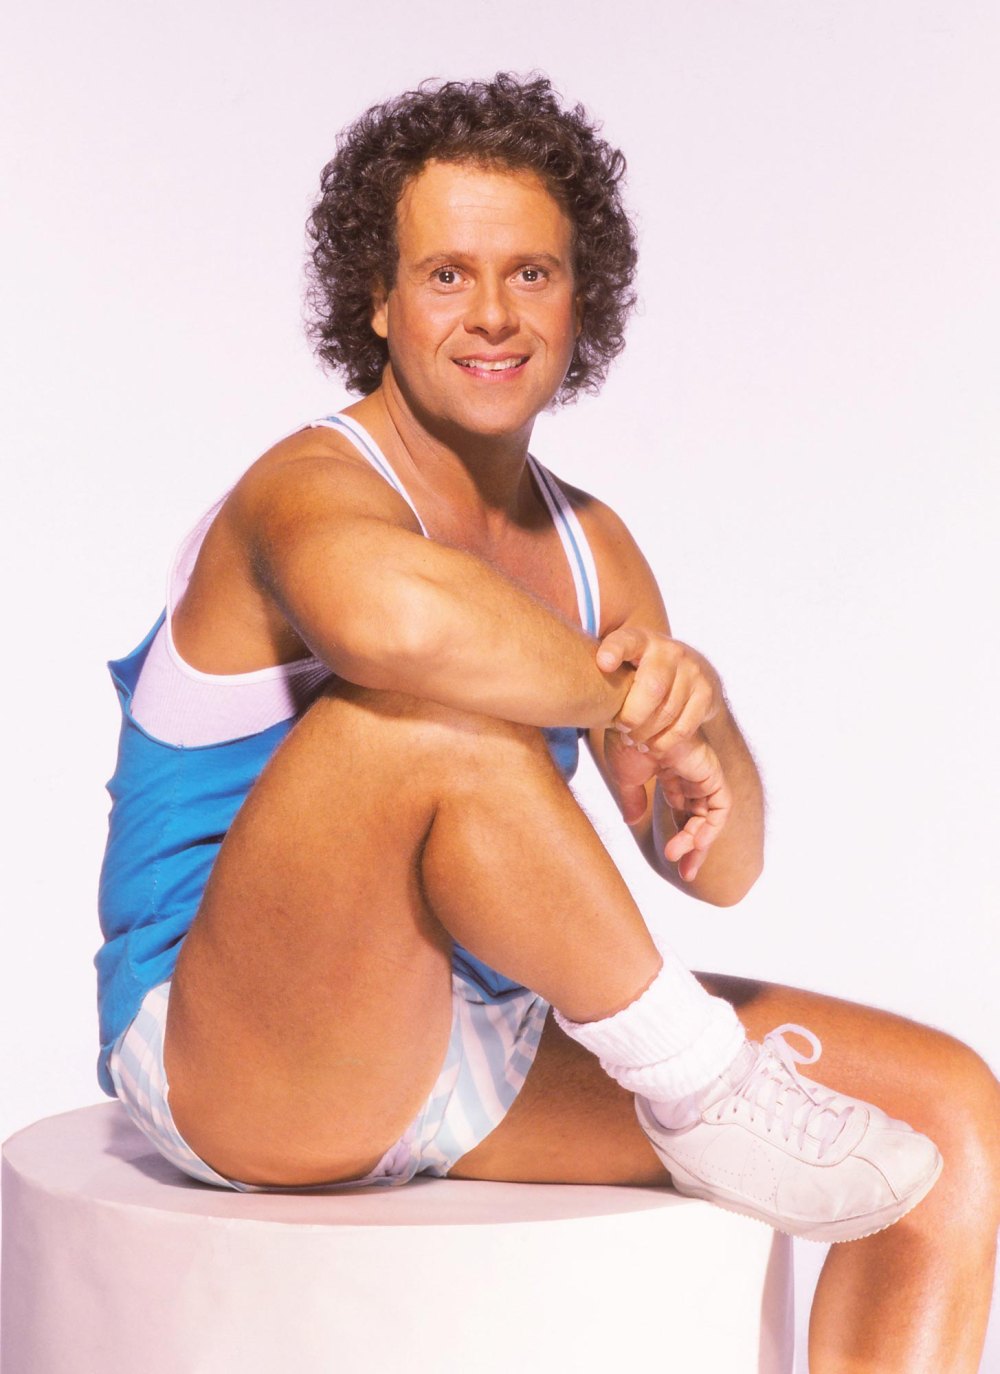 Pauly Shore Was Up All Night Crying Over Richard Simmons Response to Playing Him in Biopic